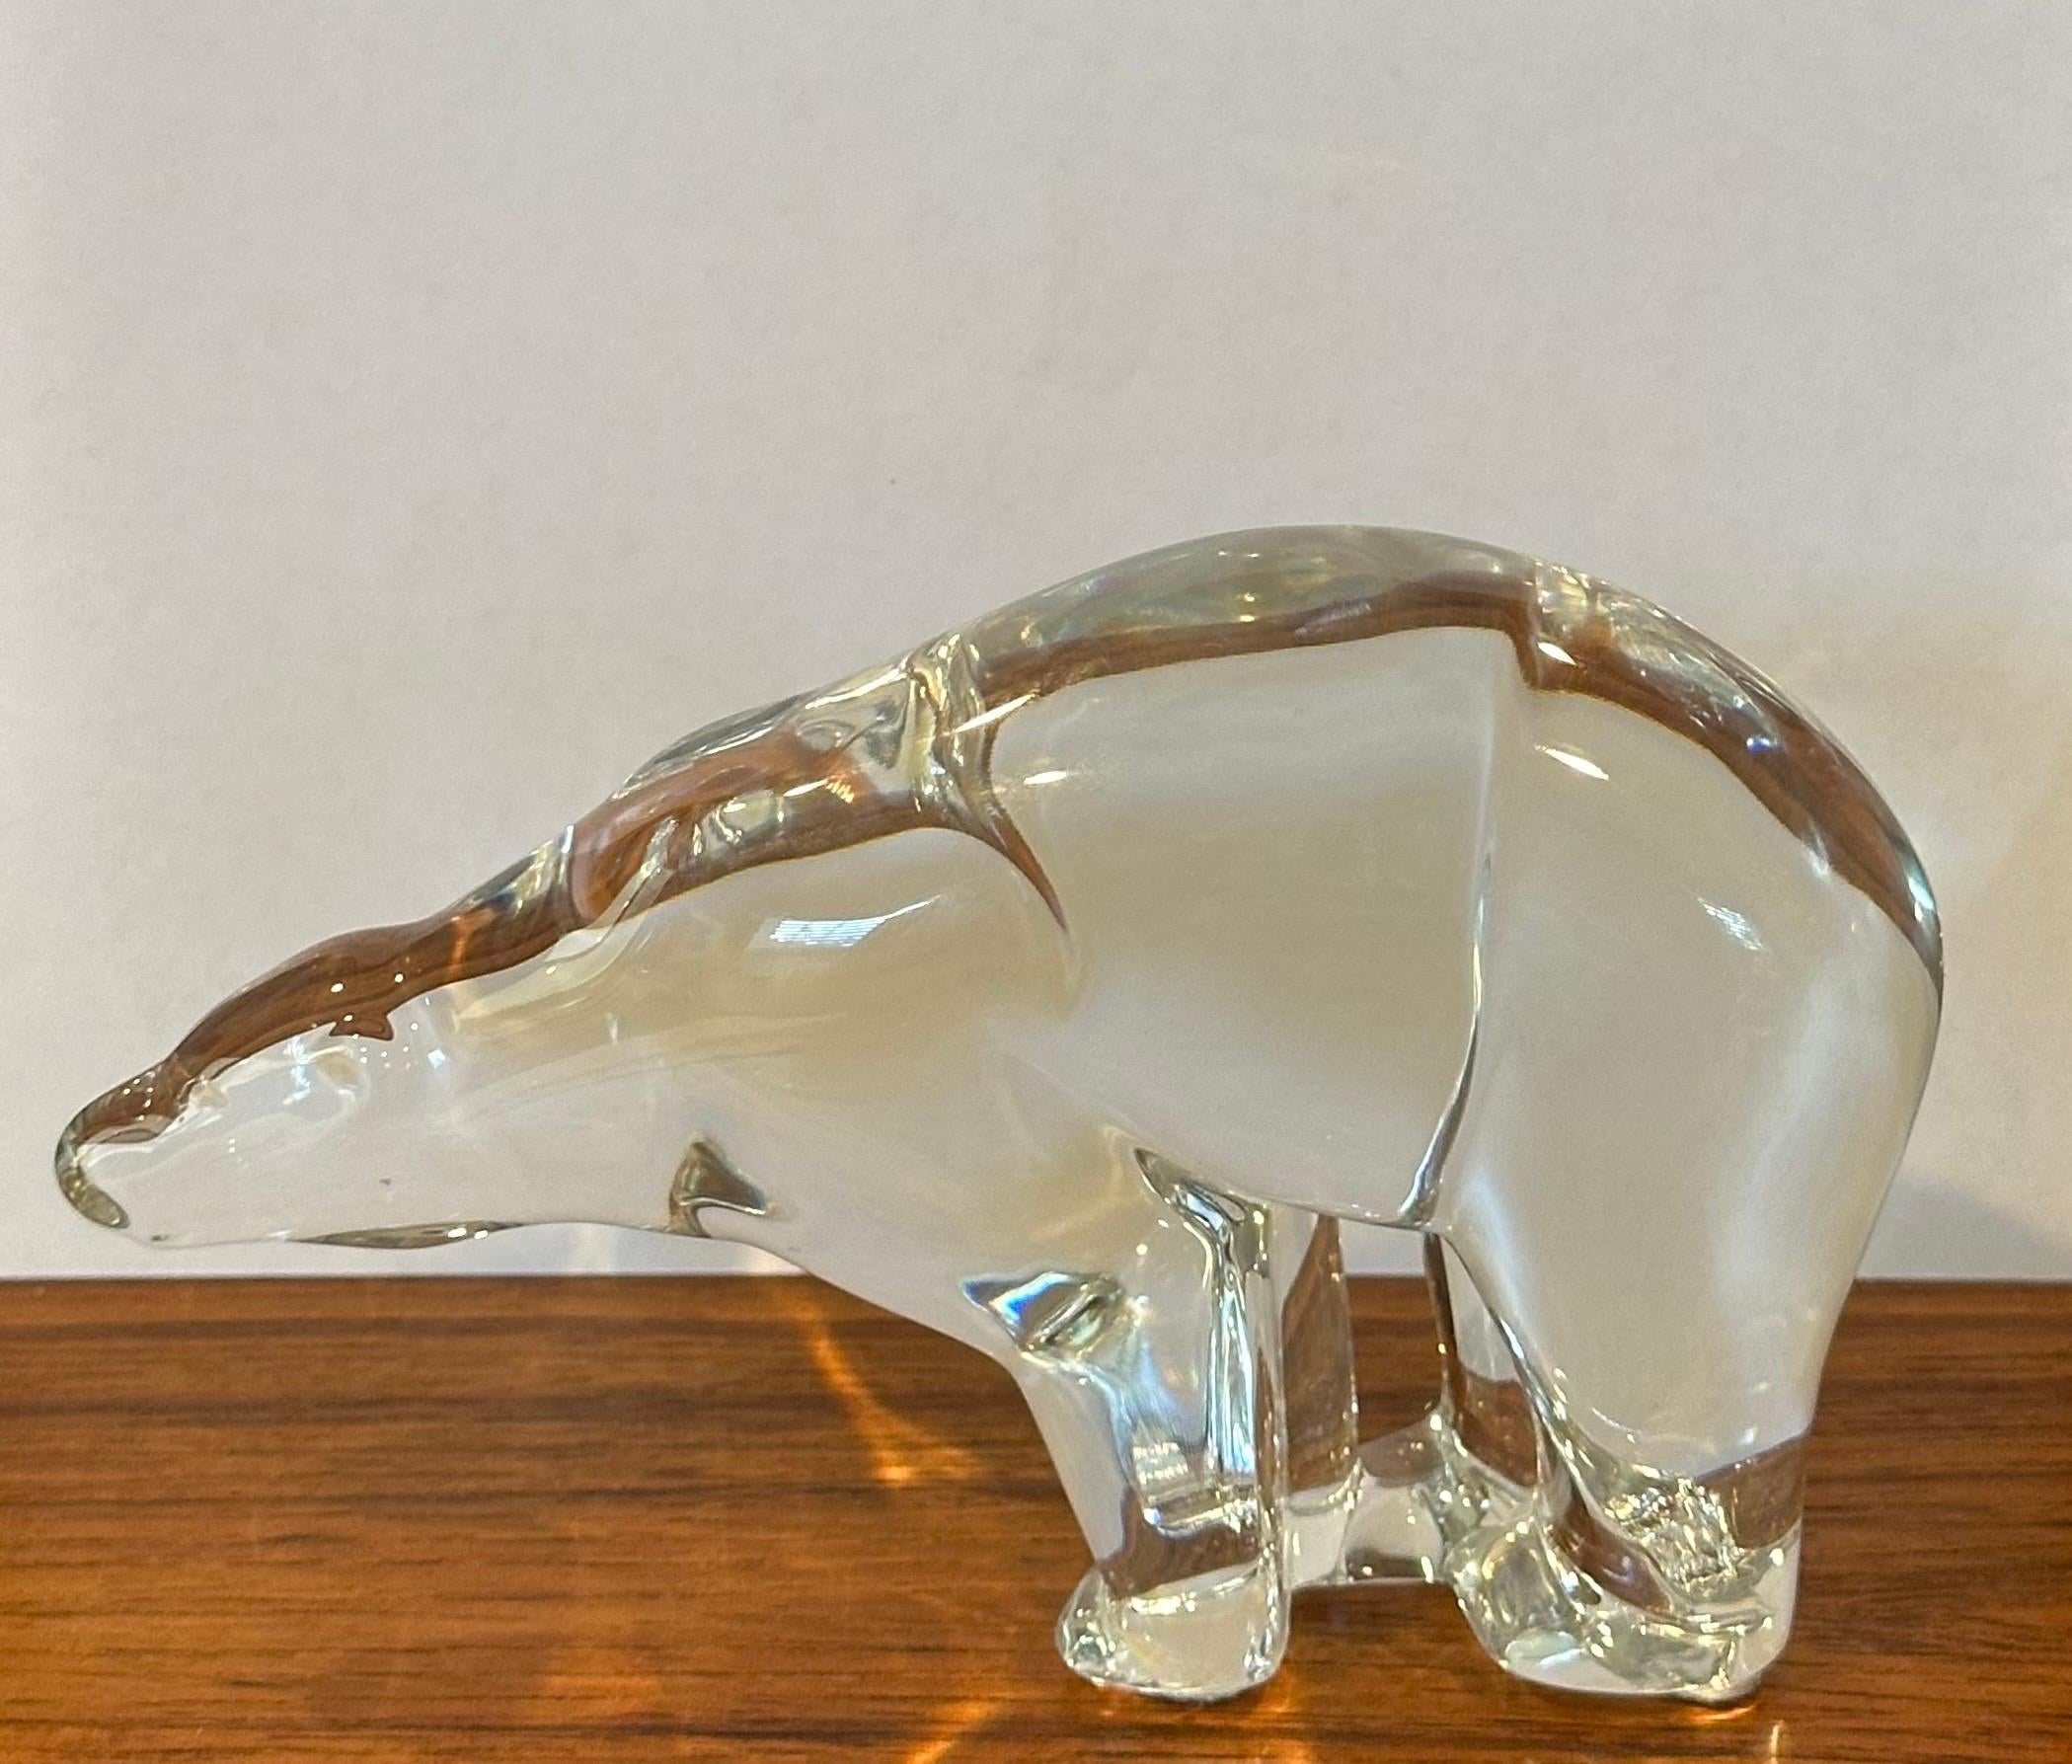 Gorgeous stylized polar bear sculpture by Baccarat, circa 1990s. The piece is in excellent condition with no visible imperfections and has great clarity. Signed on the underside, the piece measures 6.5